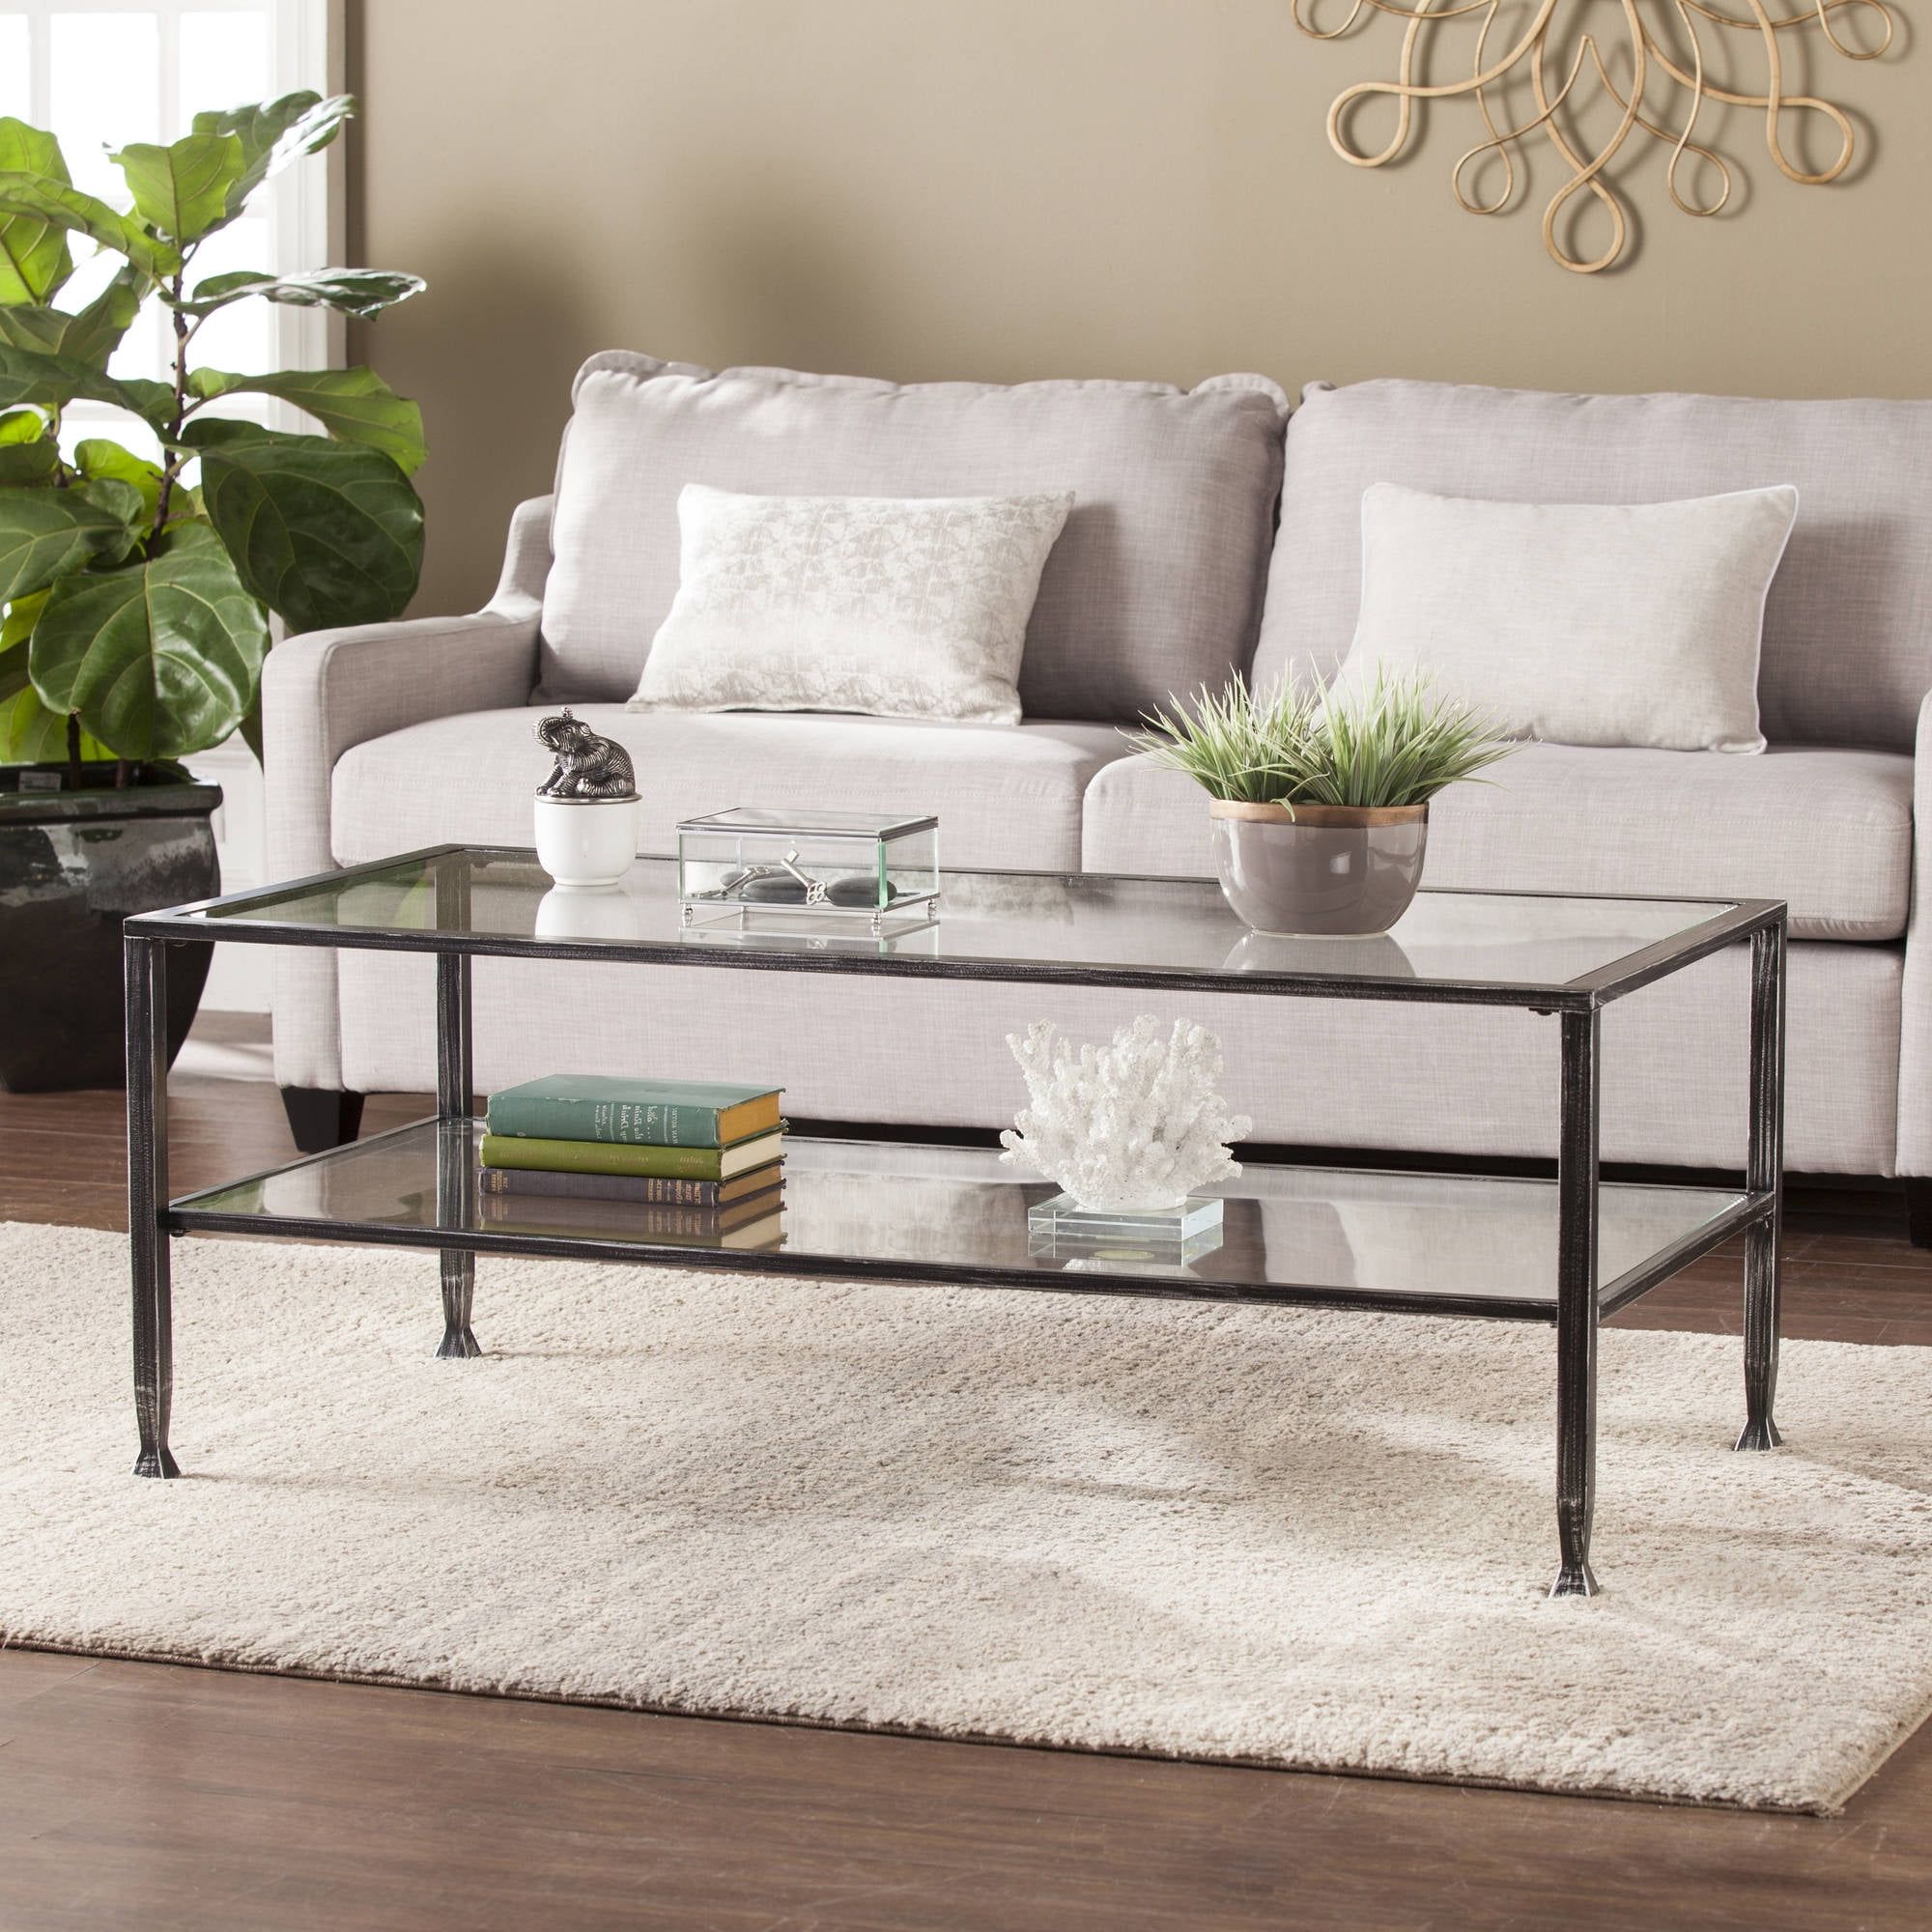 Jumpluff Metal/glass Rectangular Open Shelf Coffee Table, Distressed With Metal 1 Shelf Coffee Tables (View 5 of 20)